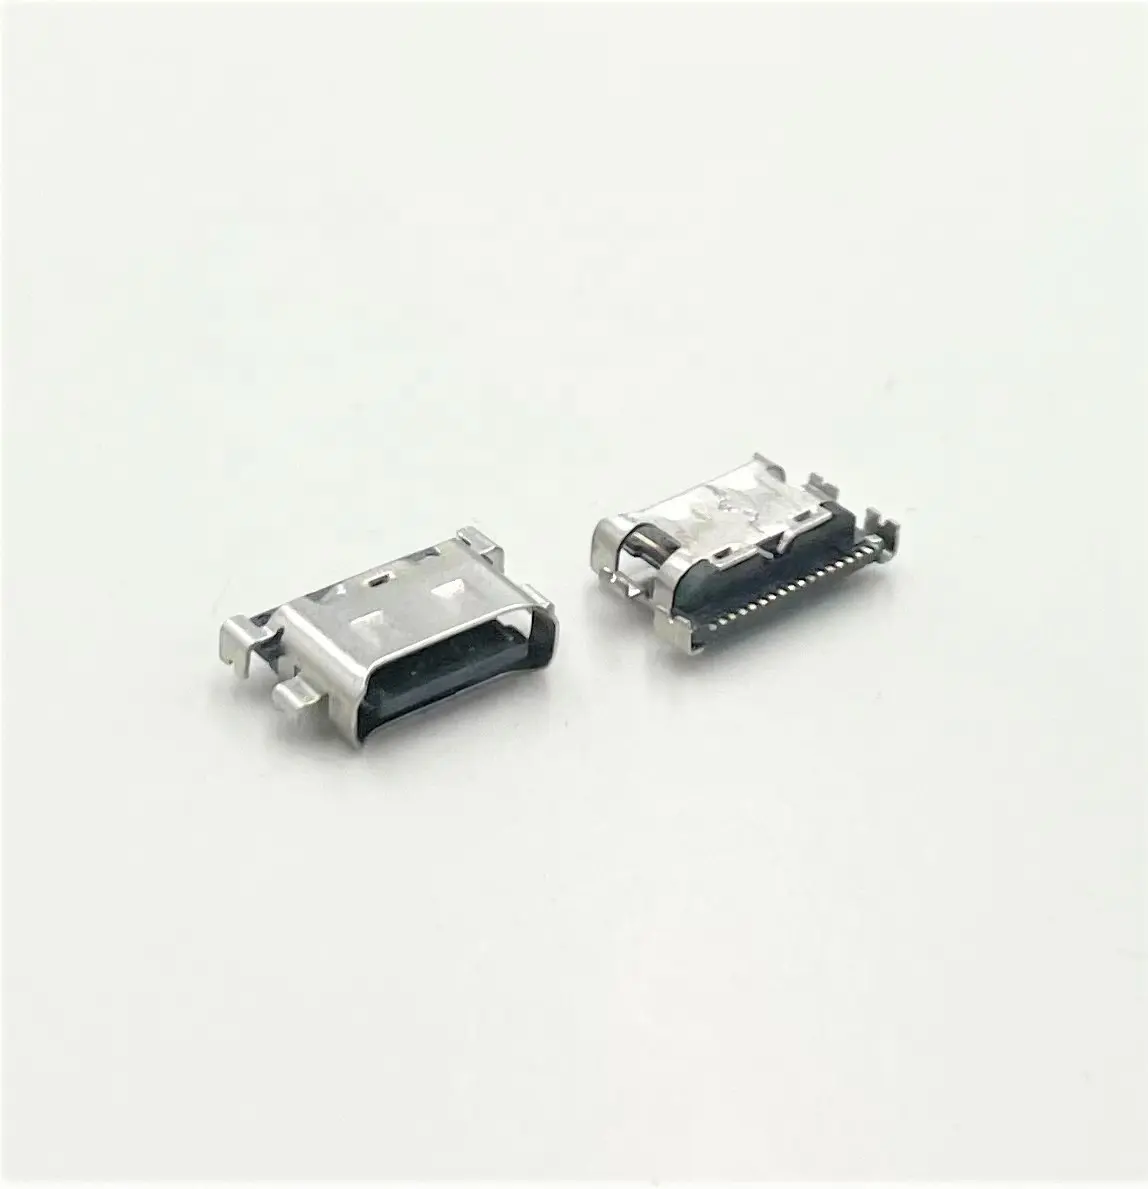 Connector Waterproof 16Pin Type C 3.1 USB Female Jack Socket Connector SMT For Data Transmission Charging